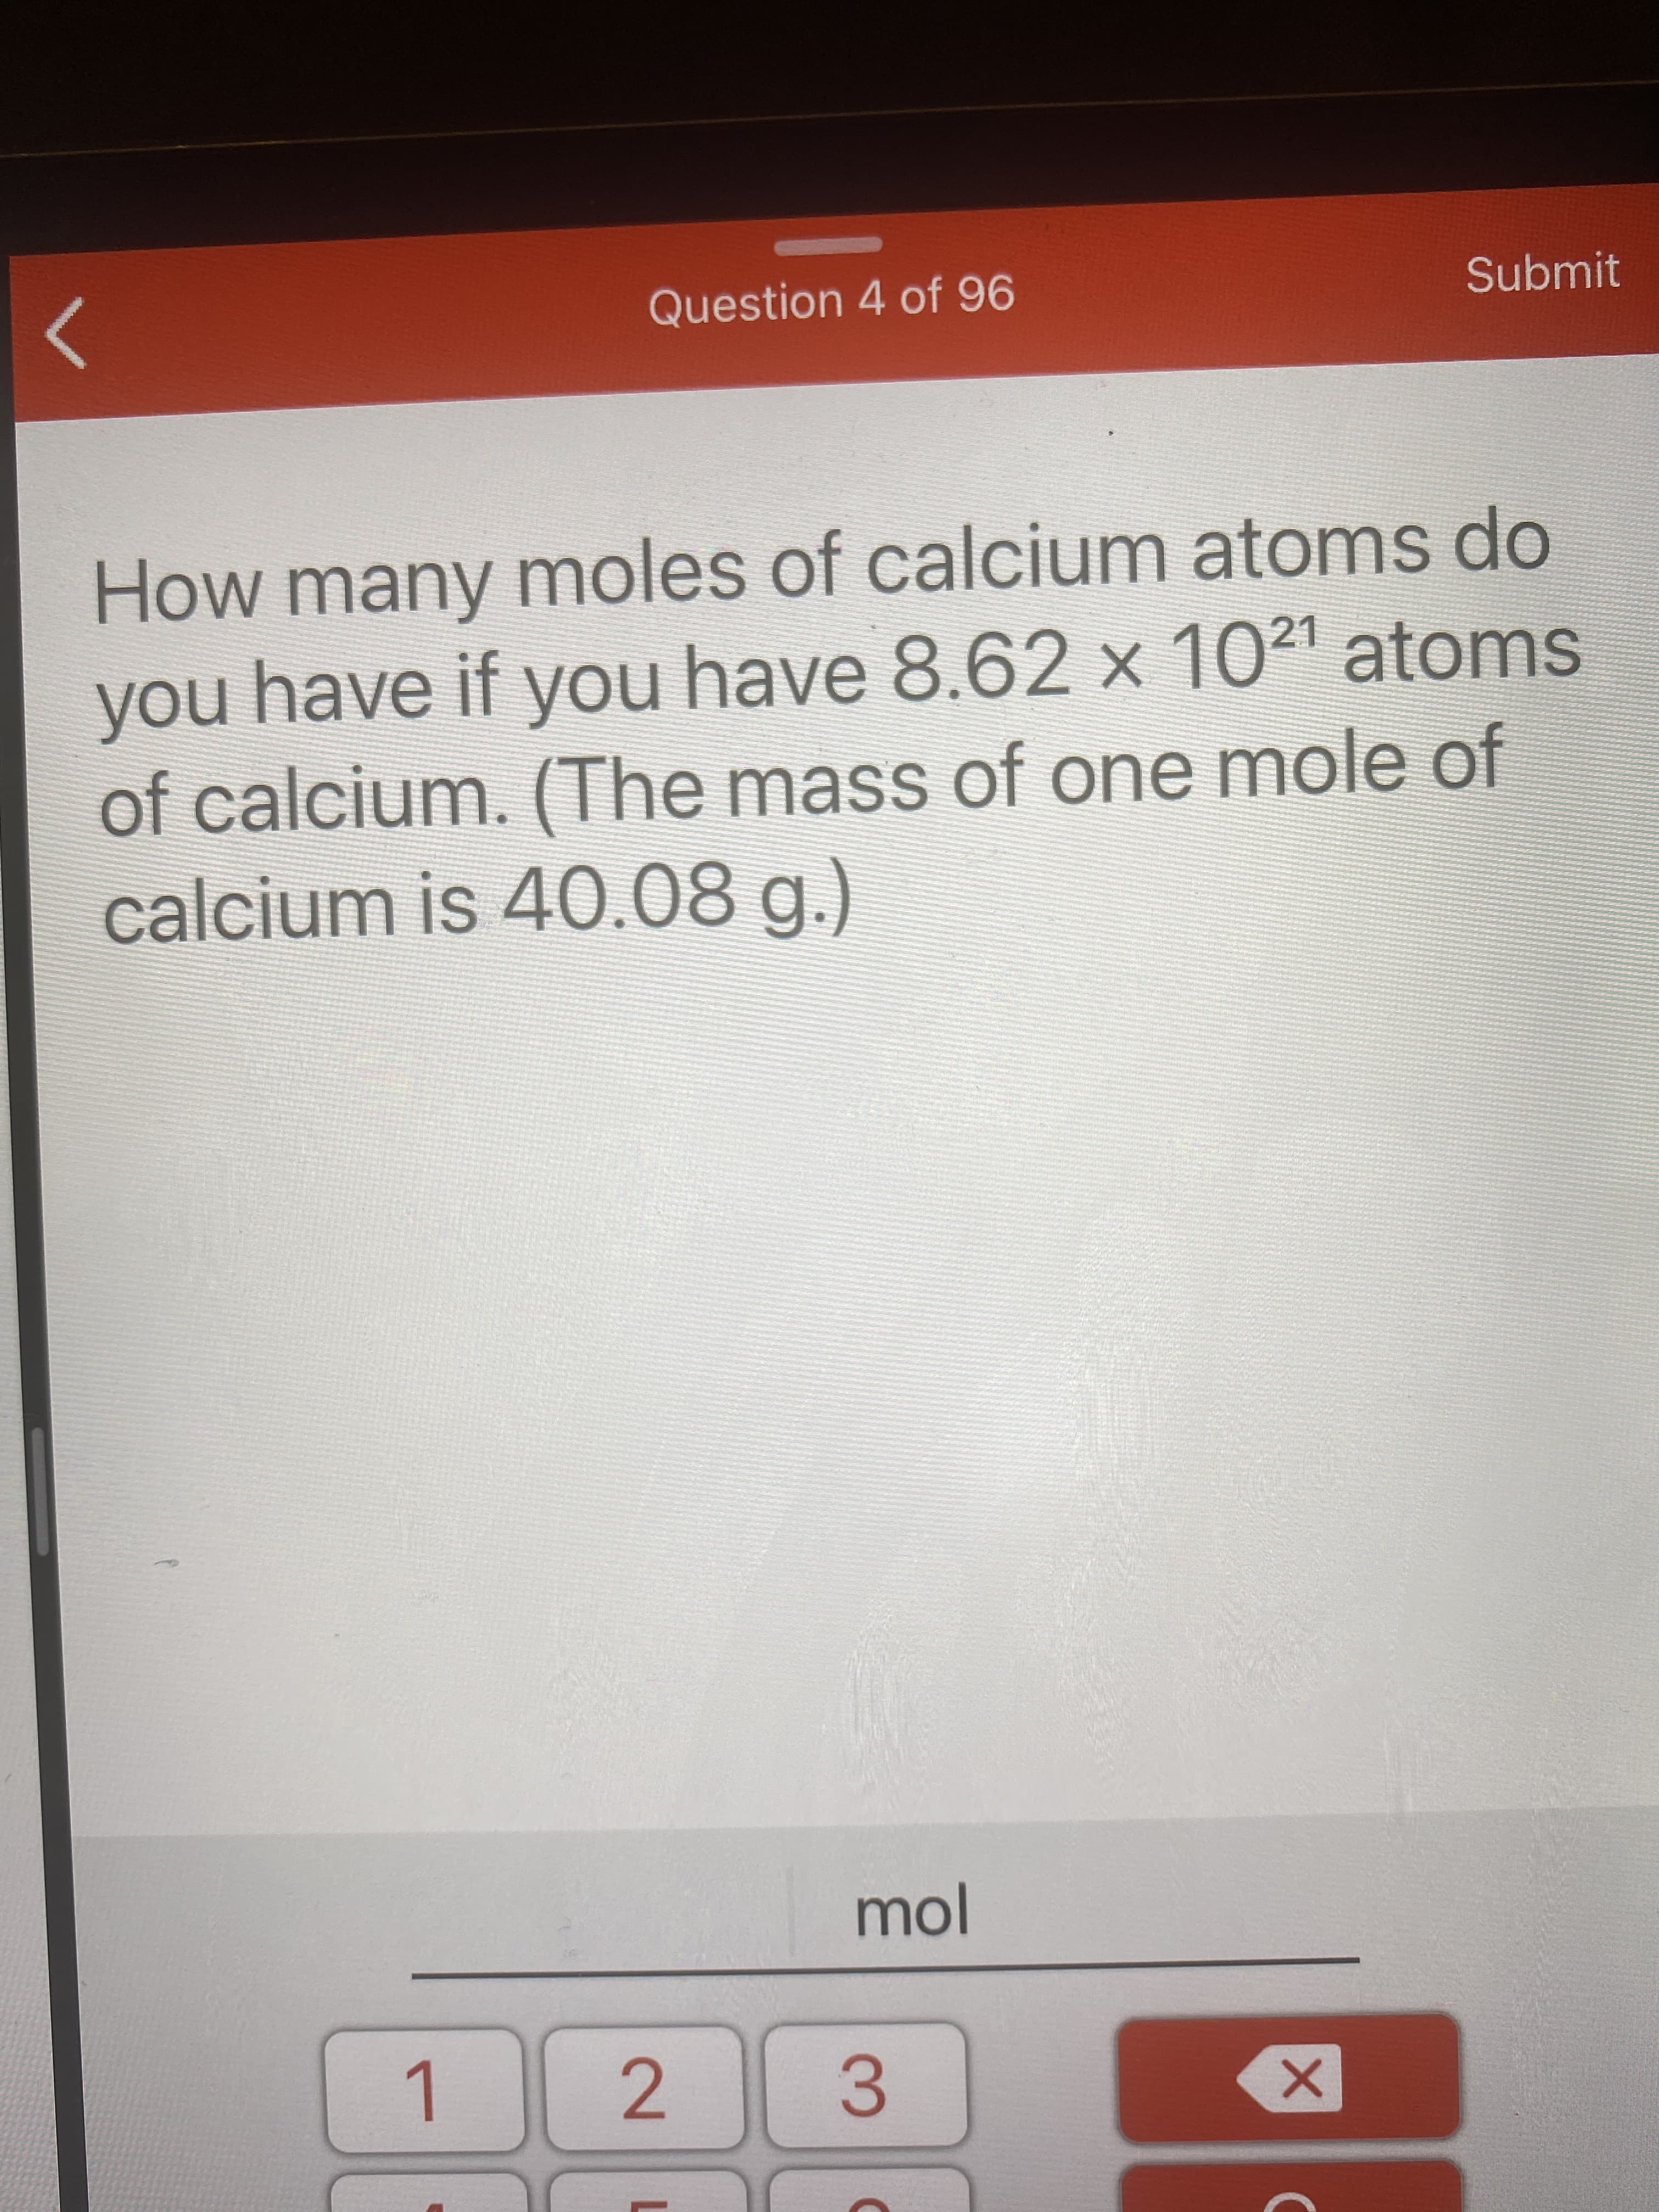 How many moles of calcium atoms do
you have if you have 8.62 x 1021 atoms
of calcium. (The mass of one mole of
calcium is 40.08 g.)
